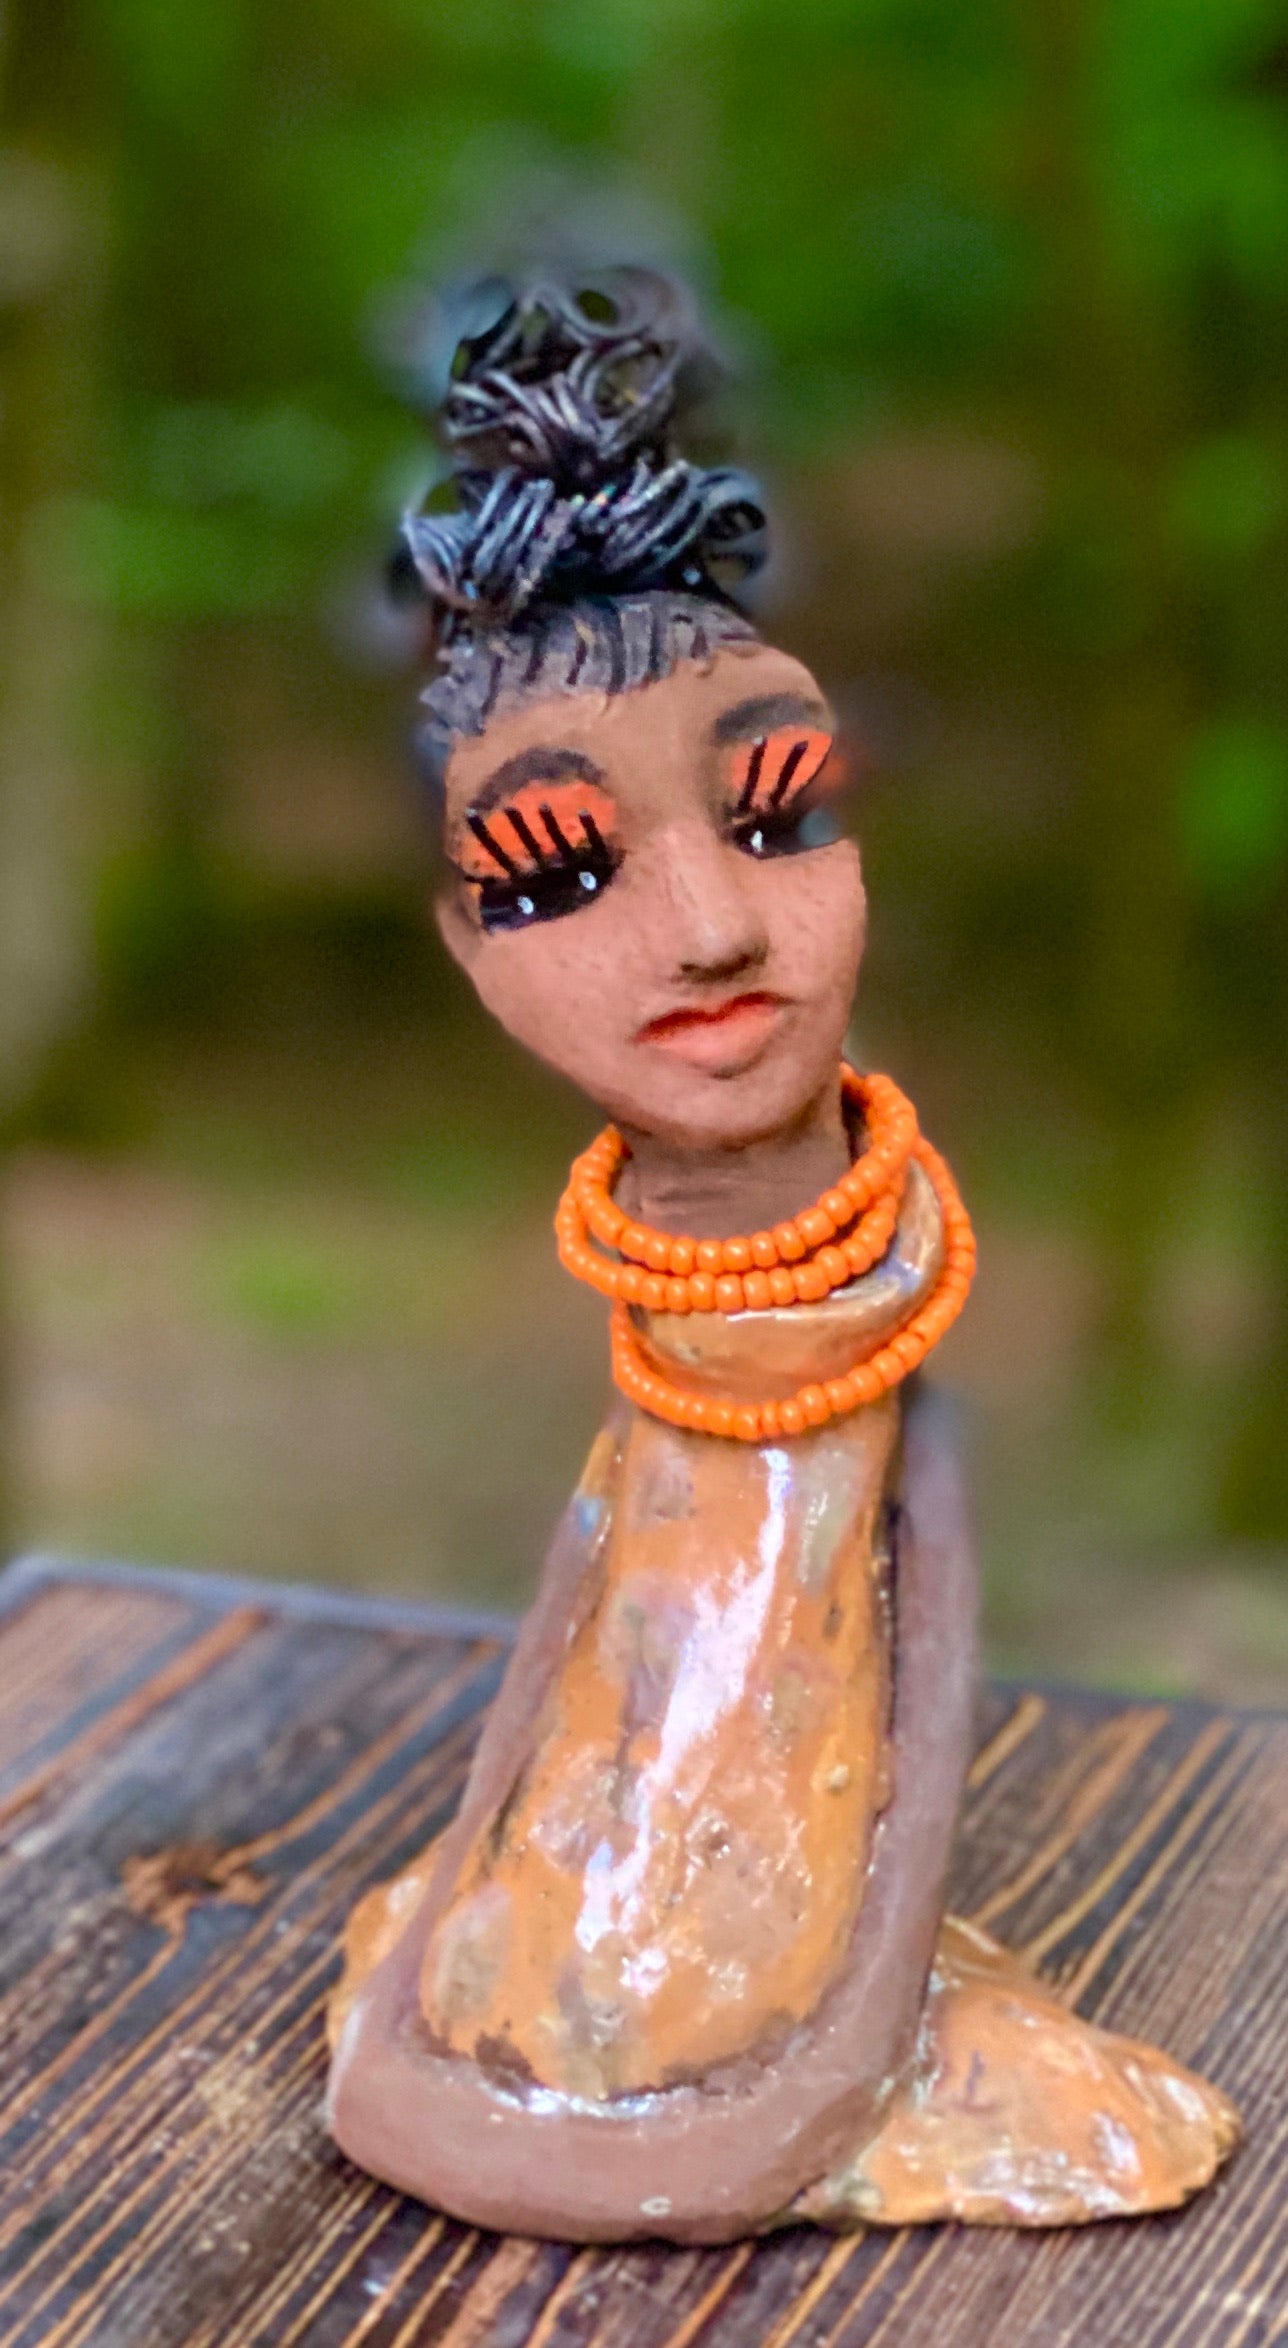 Meet Abimbola ! Abimbola stands 7' x 4"x 2" and weighs 1.3 lb. She has bright eyes and a nice honey brown complexion Abimbola  has over 5 feet of 16 gauge wire hair wrapped in a bun. Her long trademark arms rest at her side. Abimbola dress is a loving glossy orange mix with copper flashes. Abimbola is waiting for you to invite her into your home! 